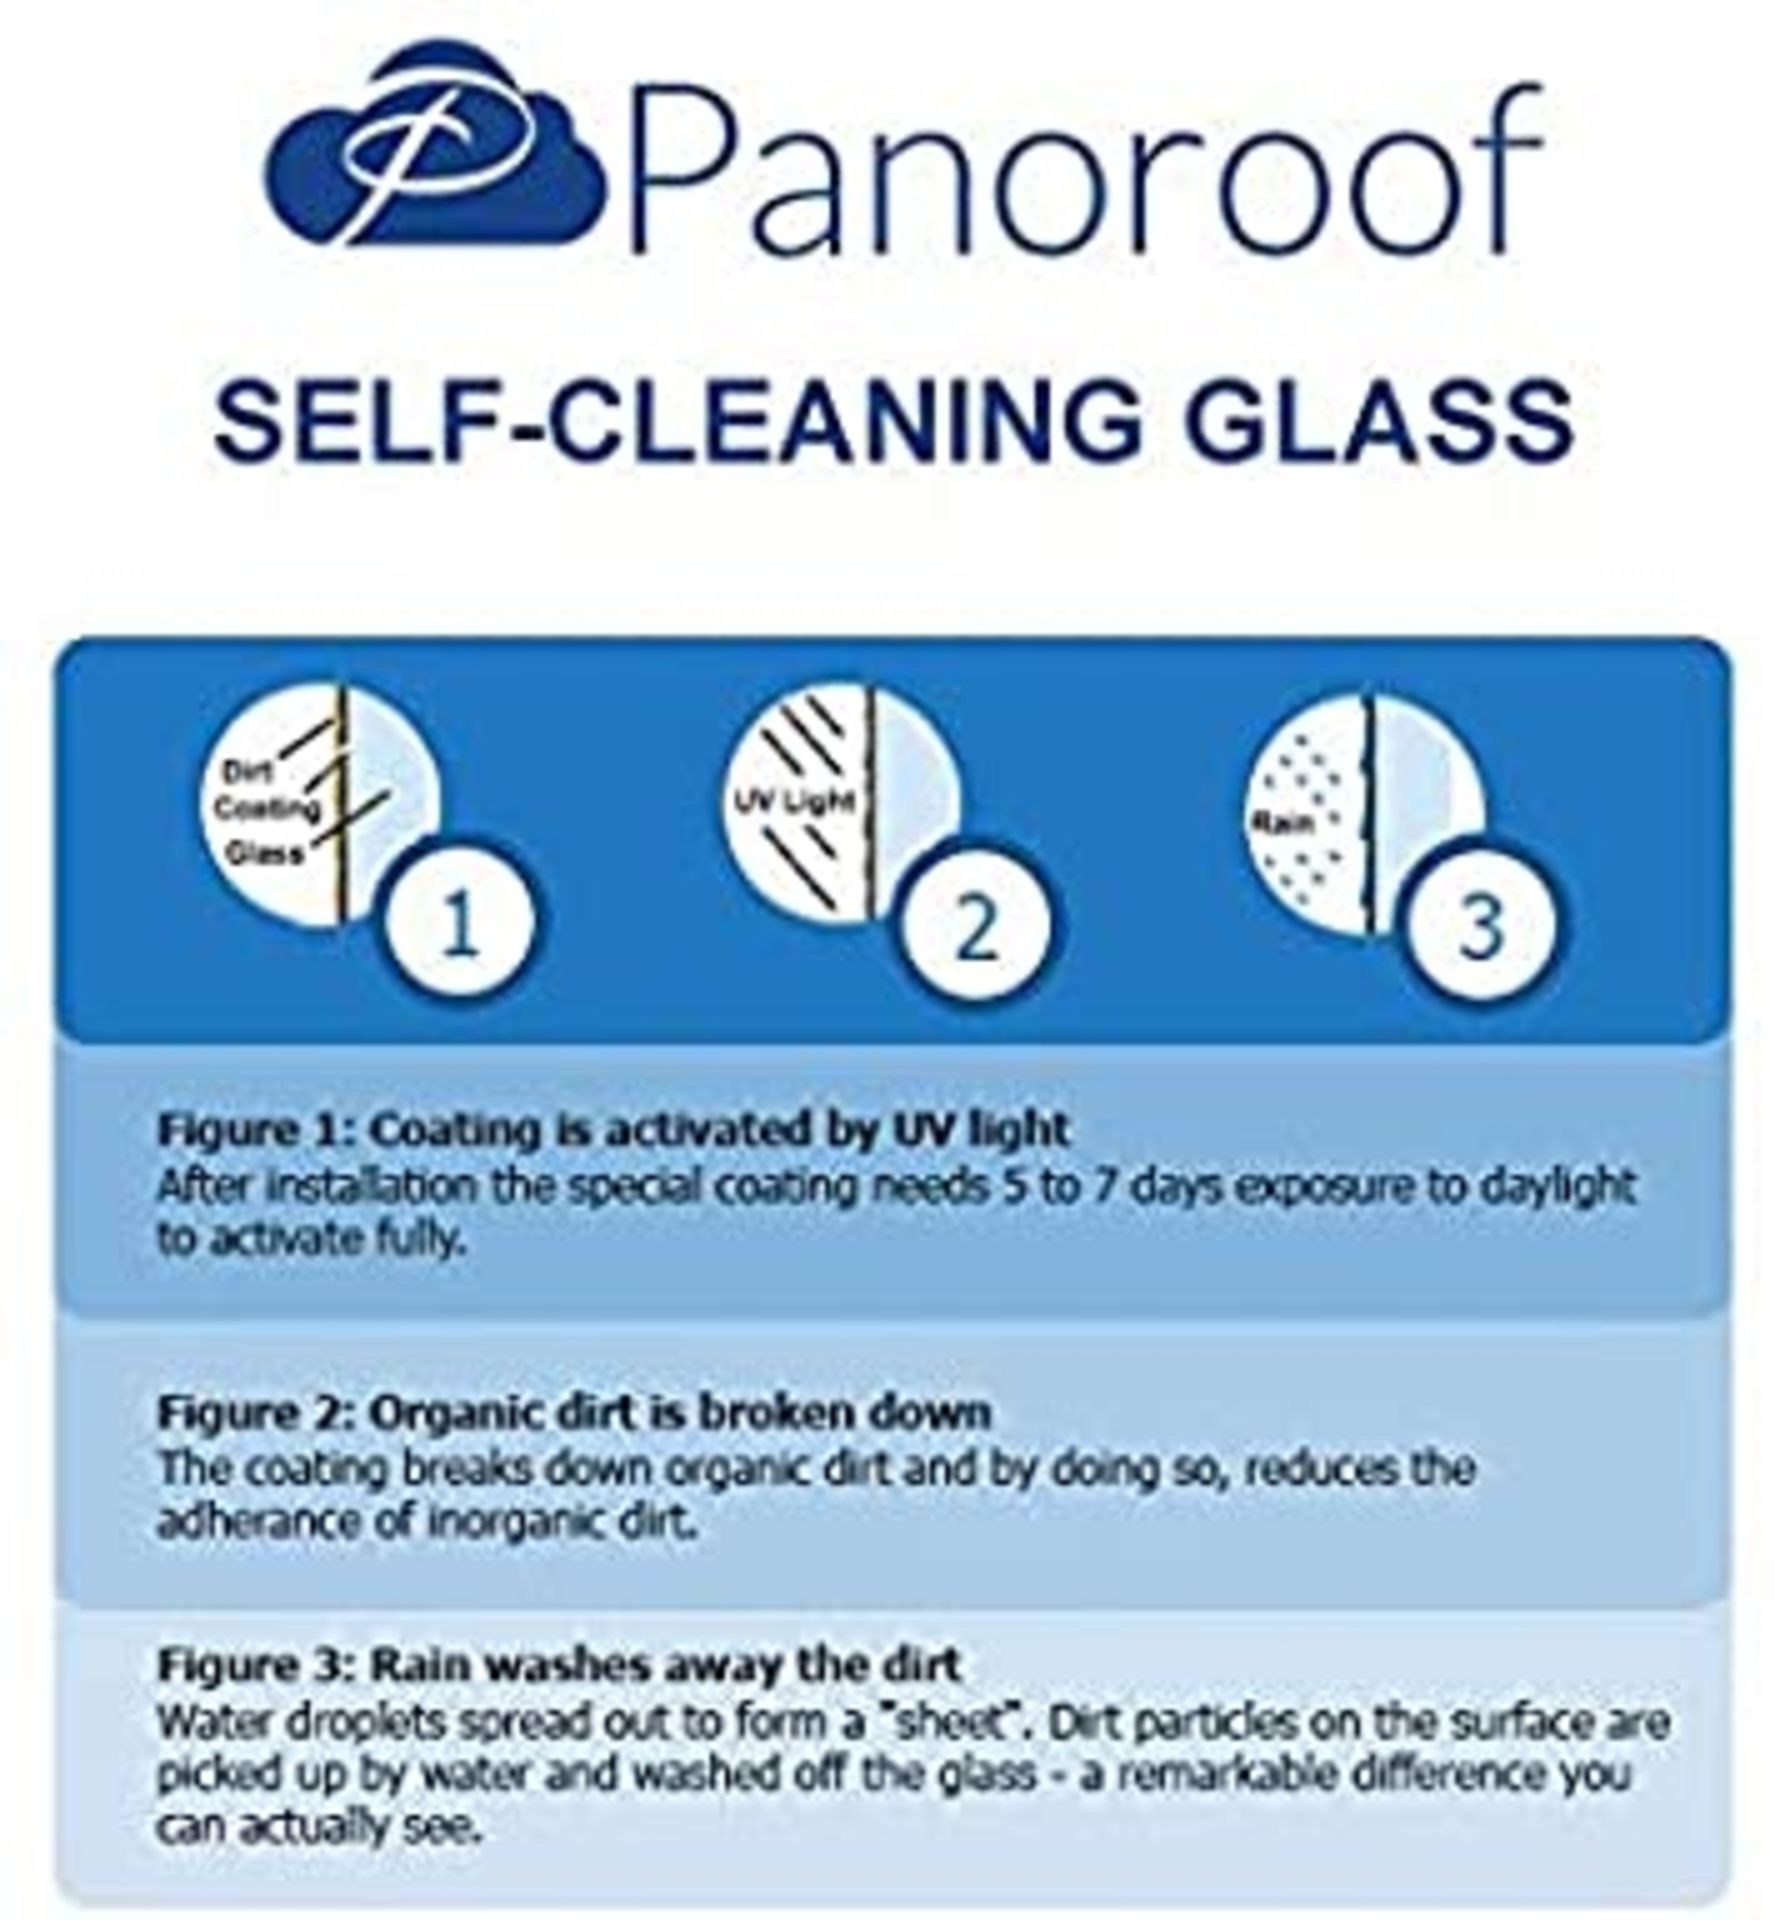 Panoroof Triple Glazed Self Cleaning ,400mmx1200mm (inside Size Visable glass area) Seamless Glass - Image 6 of 6